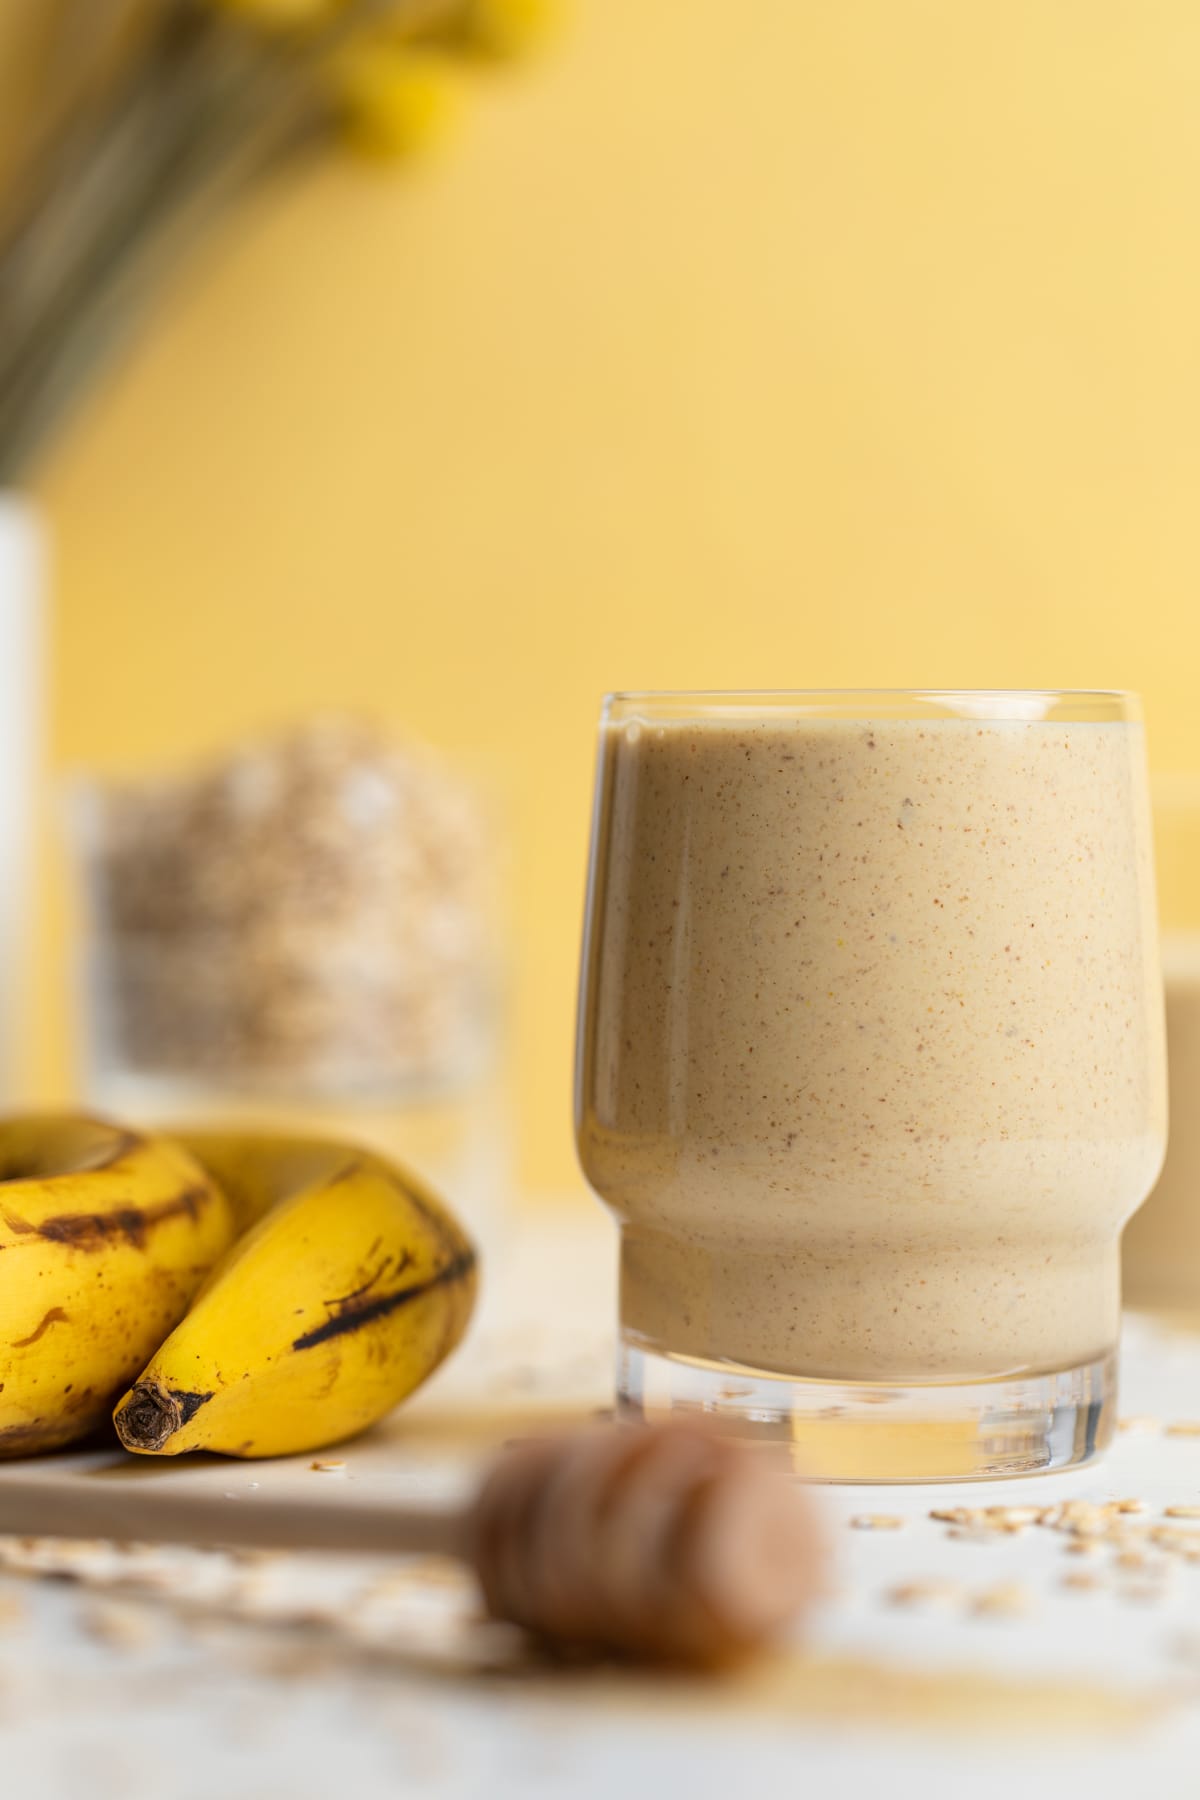 Peanut Butter Banana Oats Smoothie next to some bananas.